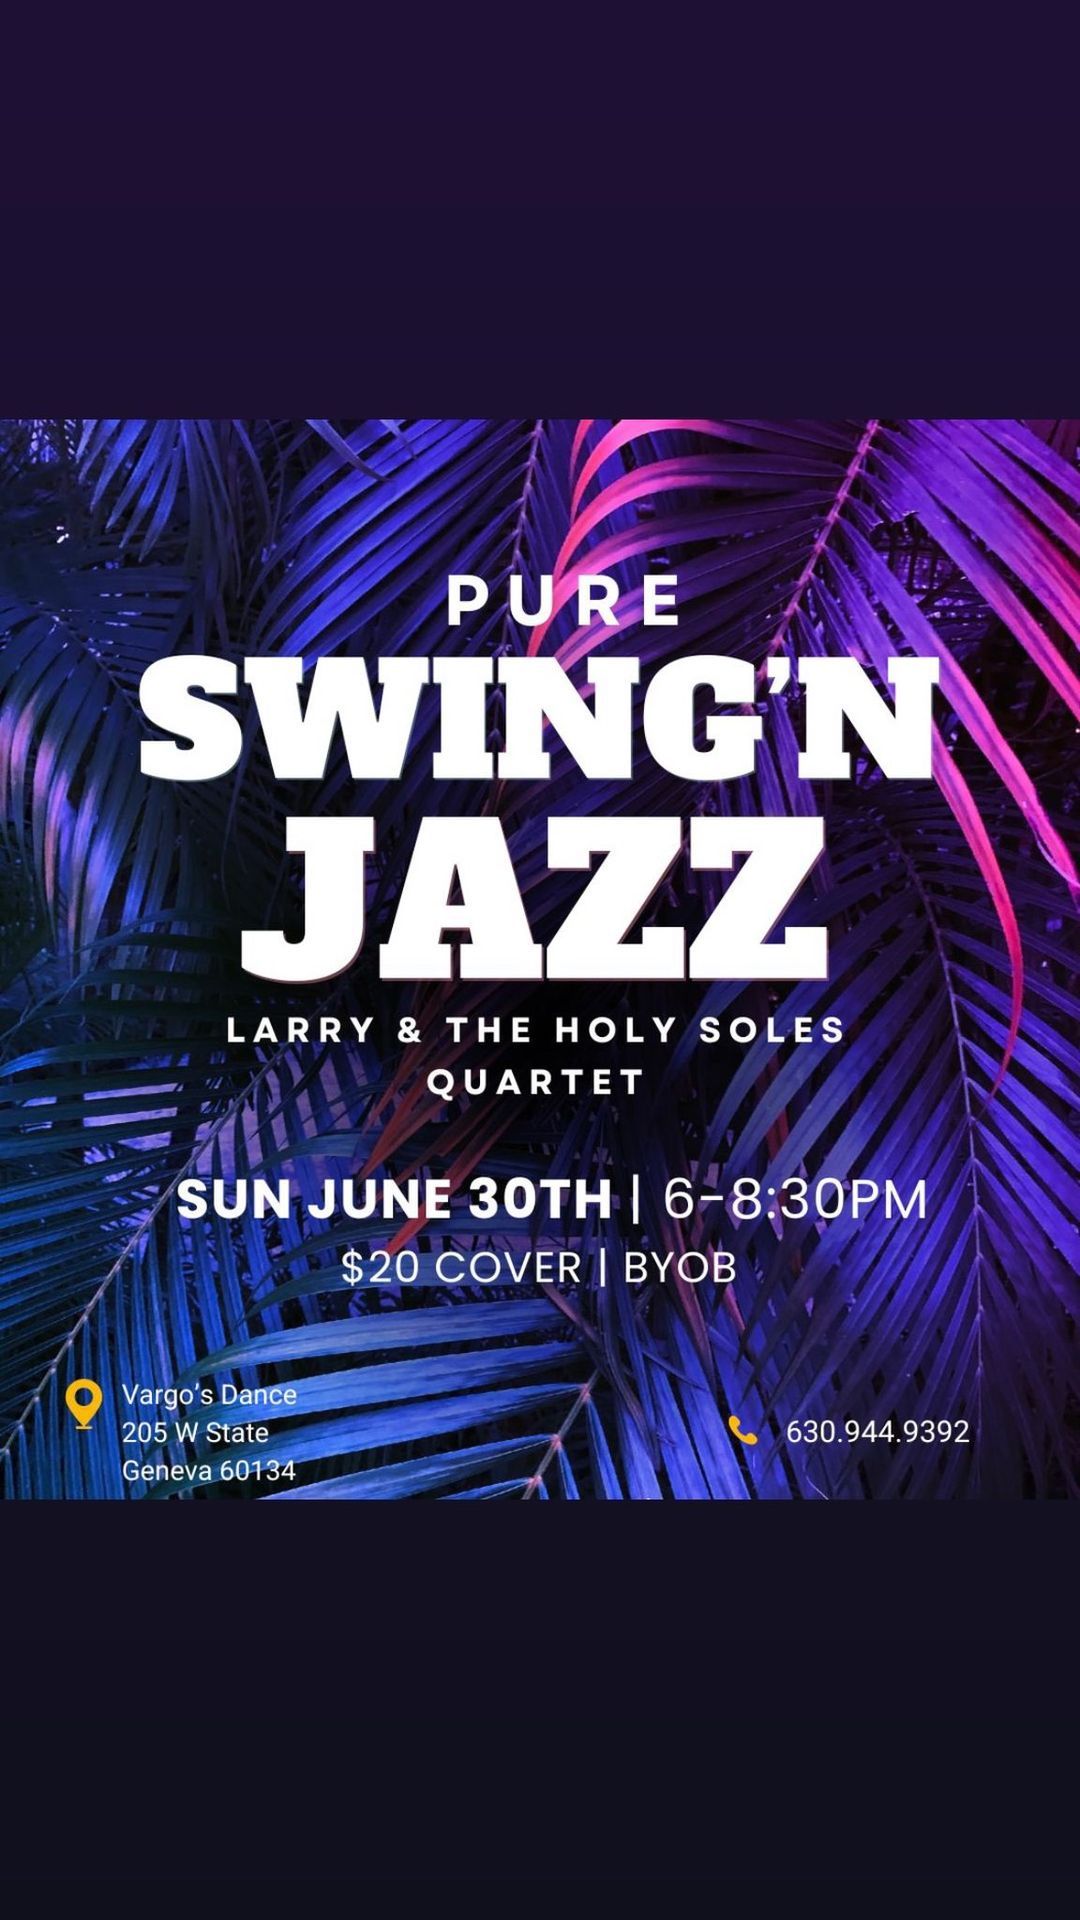 Pure Swing\u2019N Jazz with Larry & the Holy Soles!